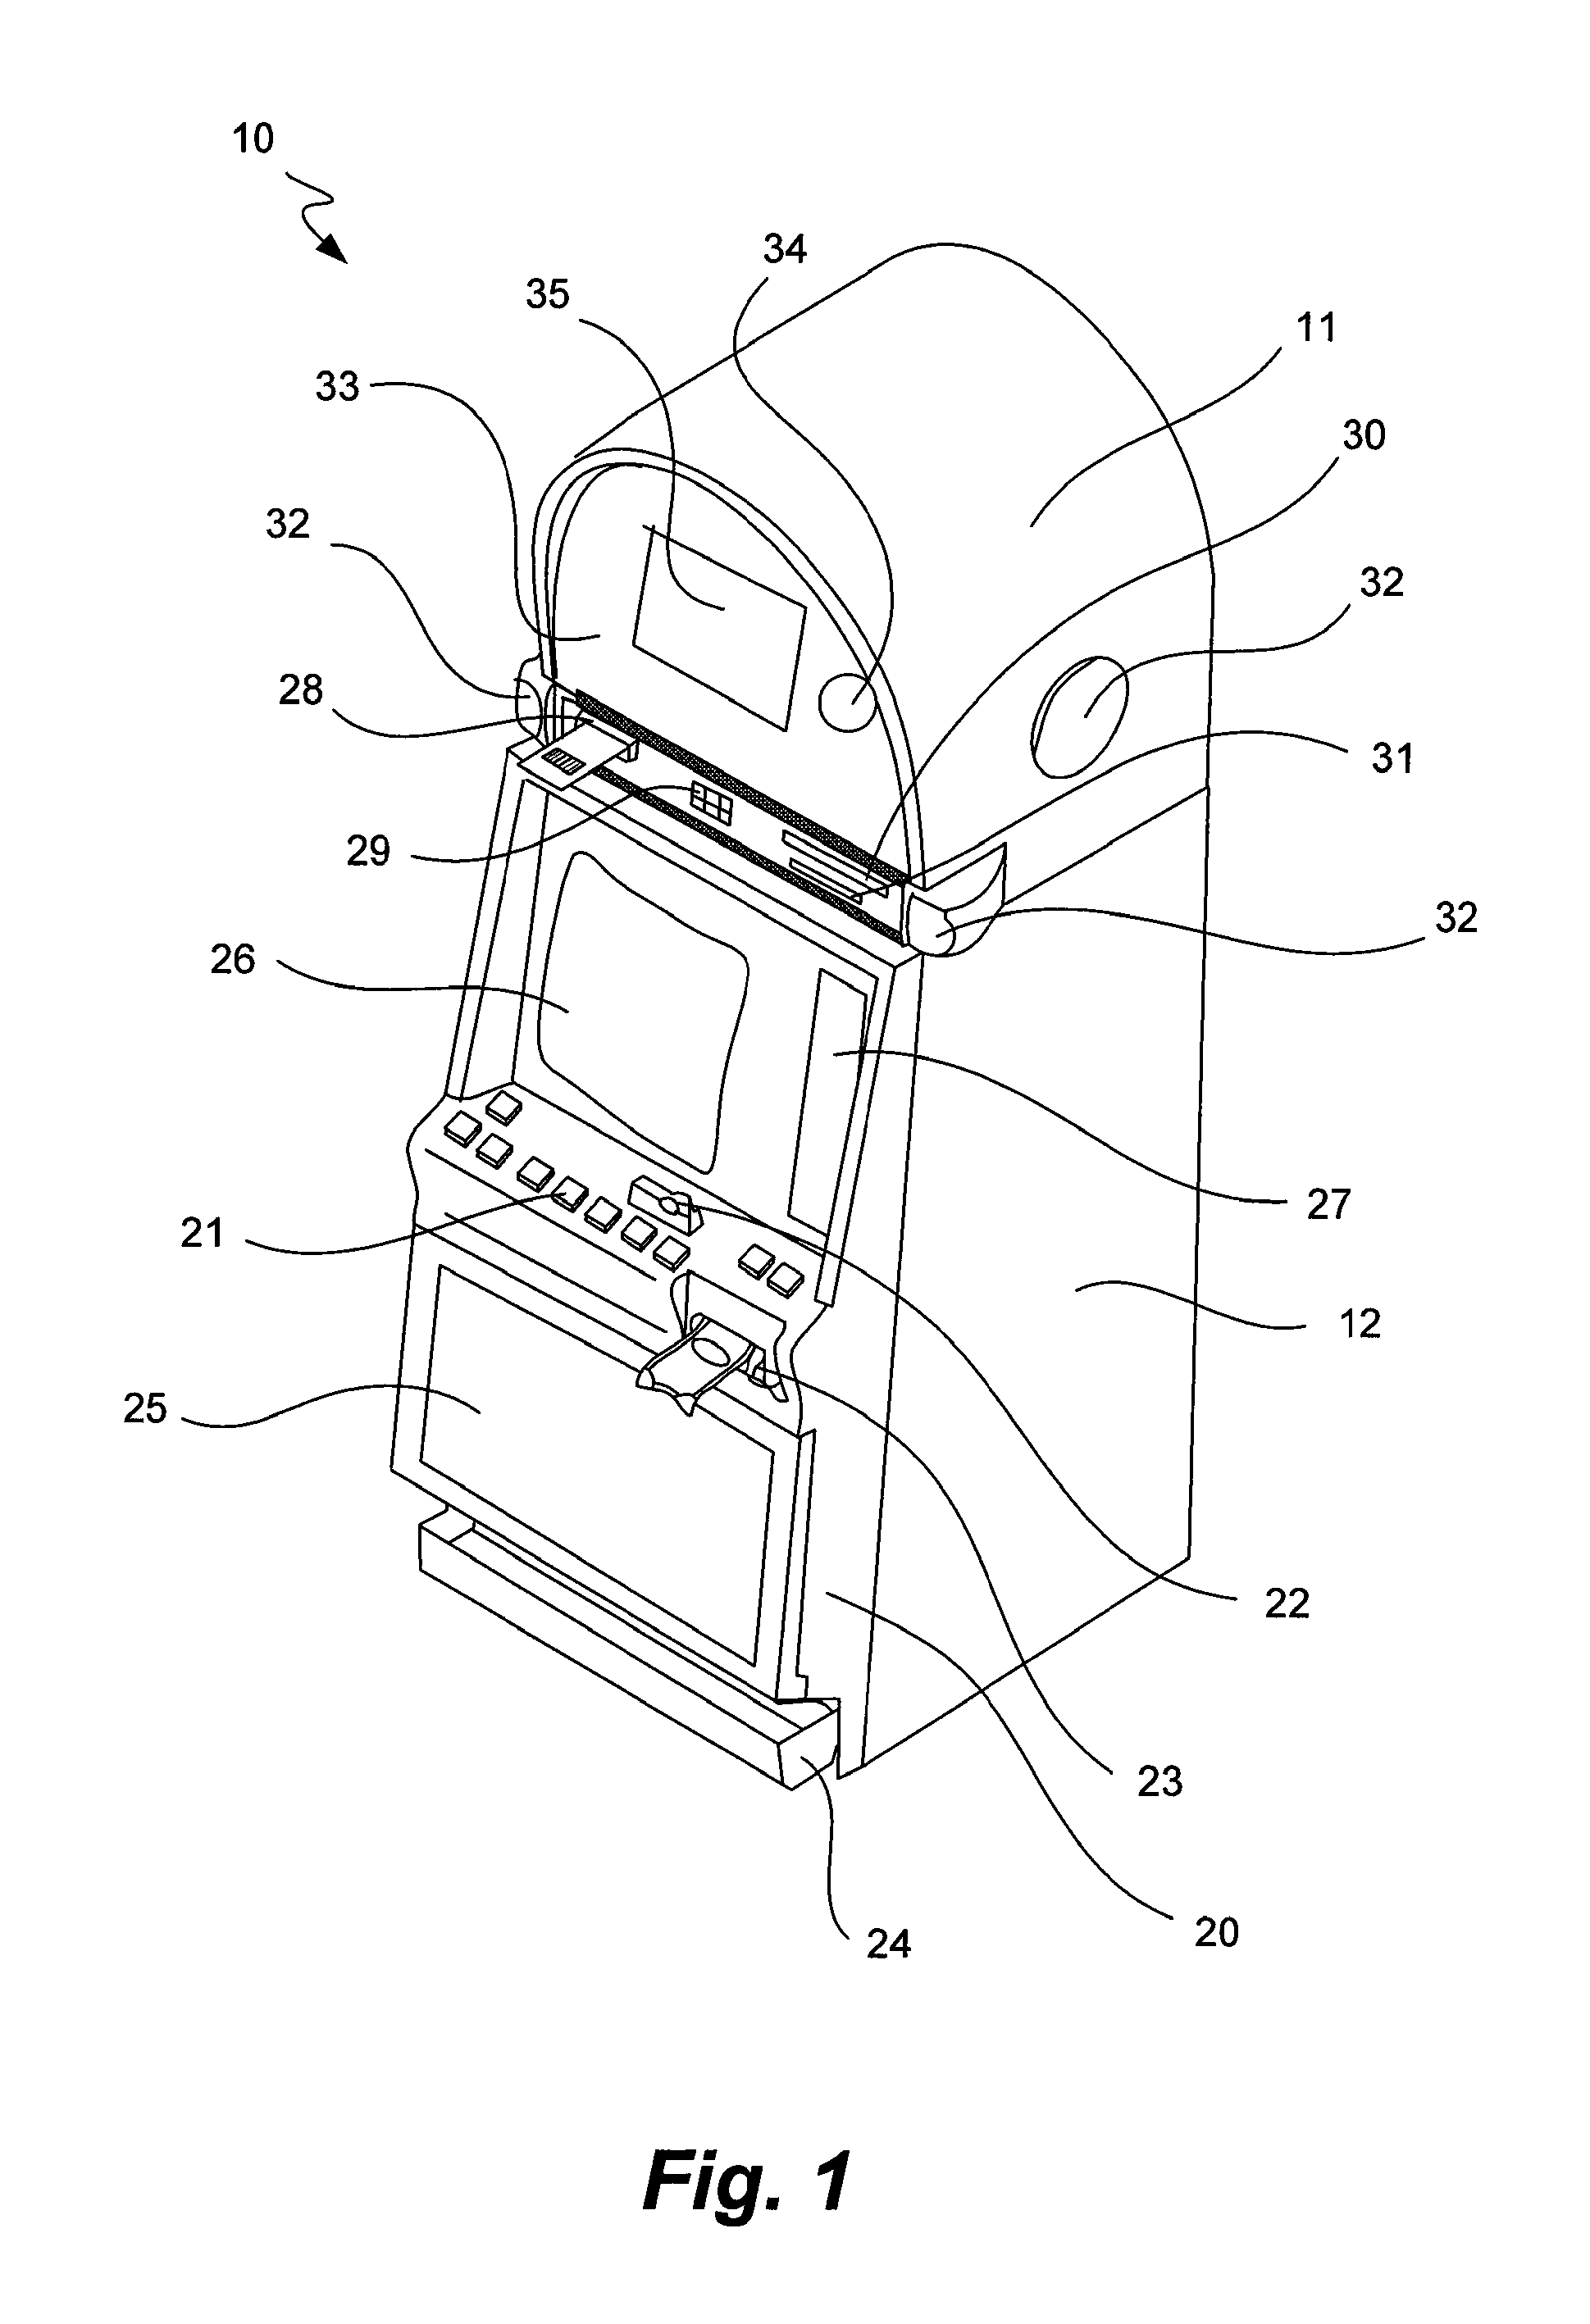 Casino display methods and devices